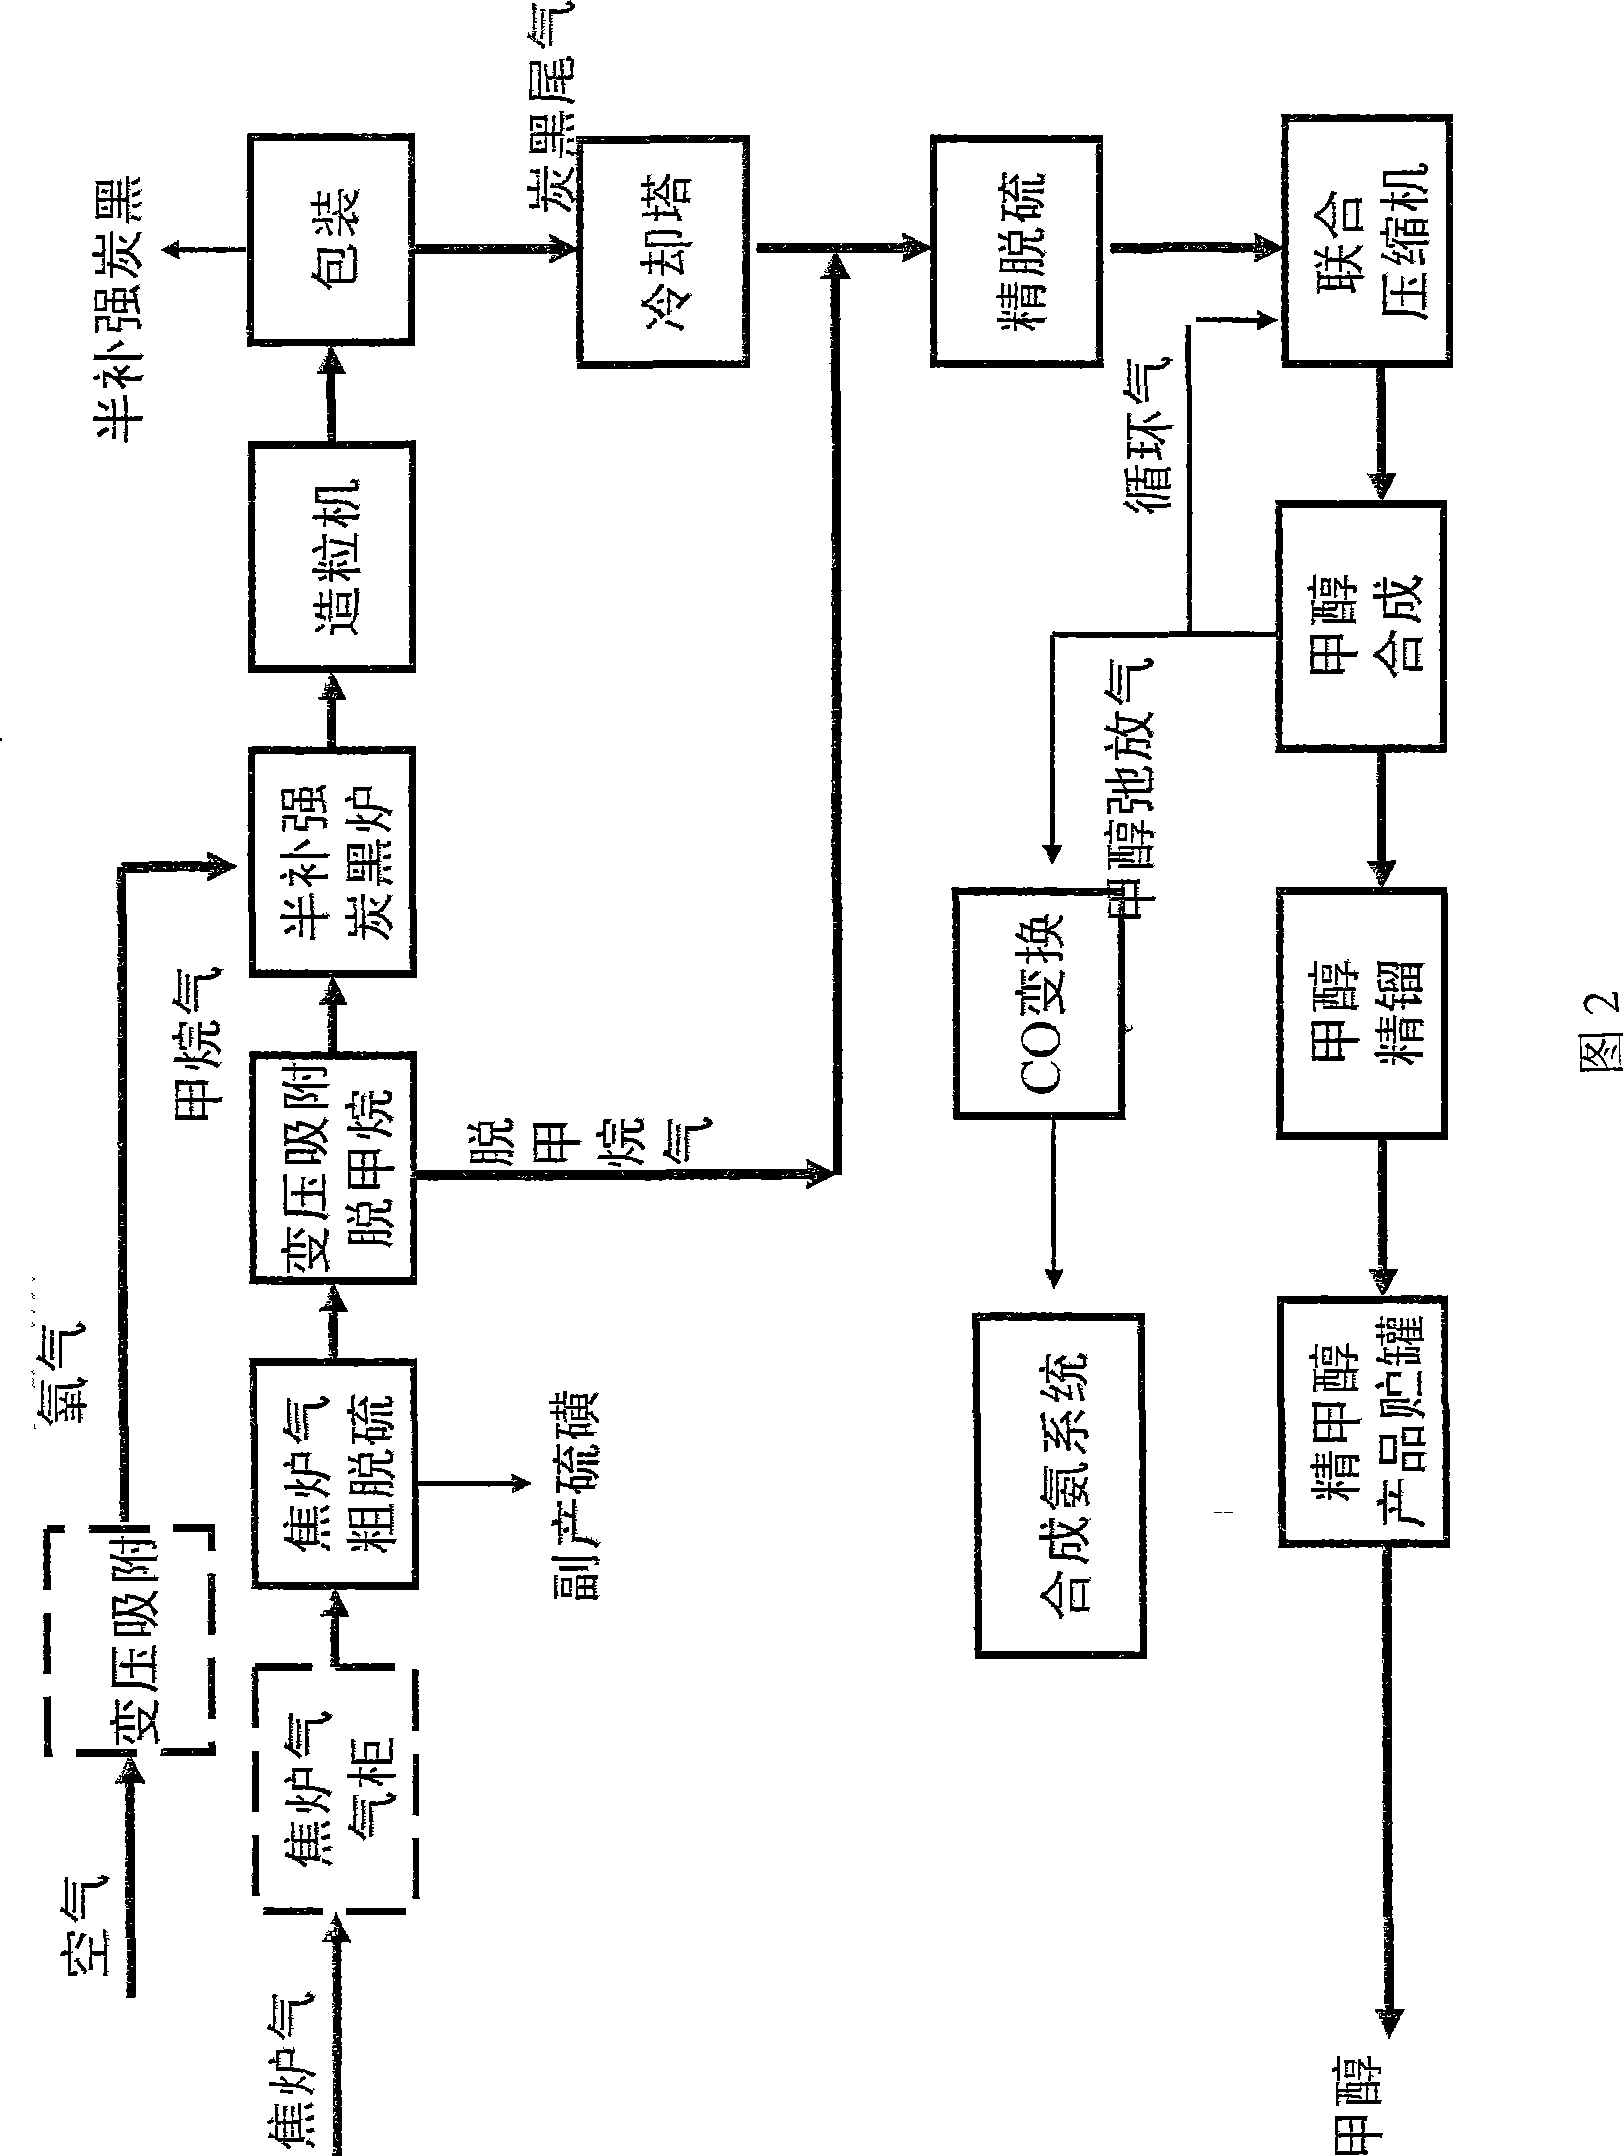 Method for producing semi-reinforcing hydrocarbon black, methanol, liquid ammonia with coke oven gas